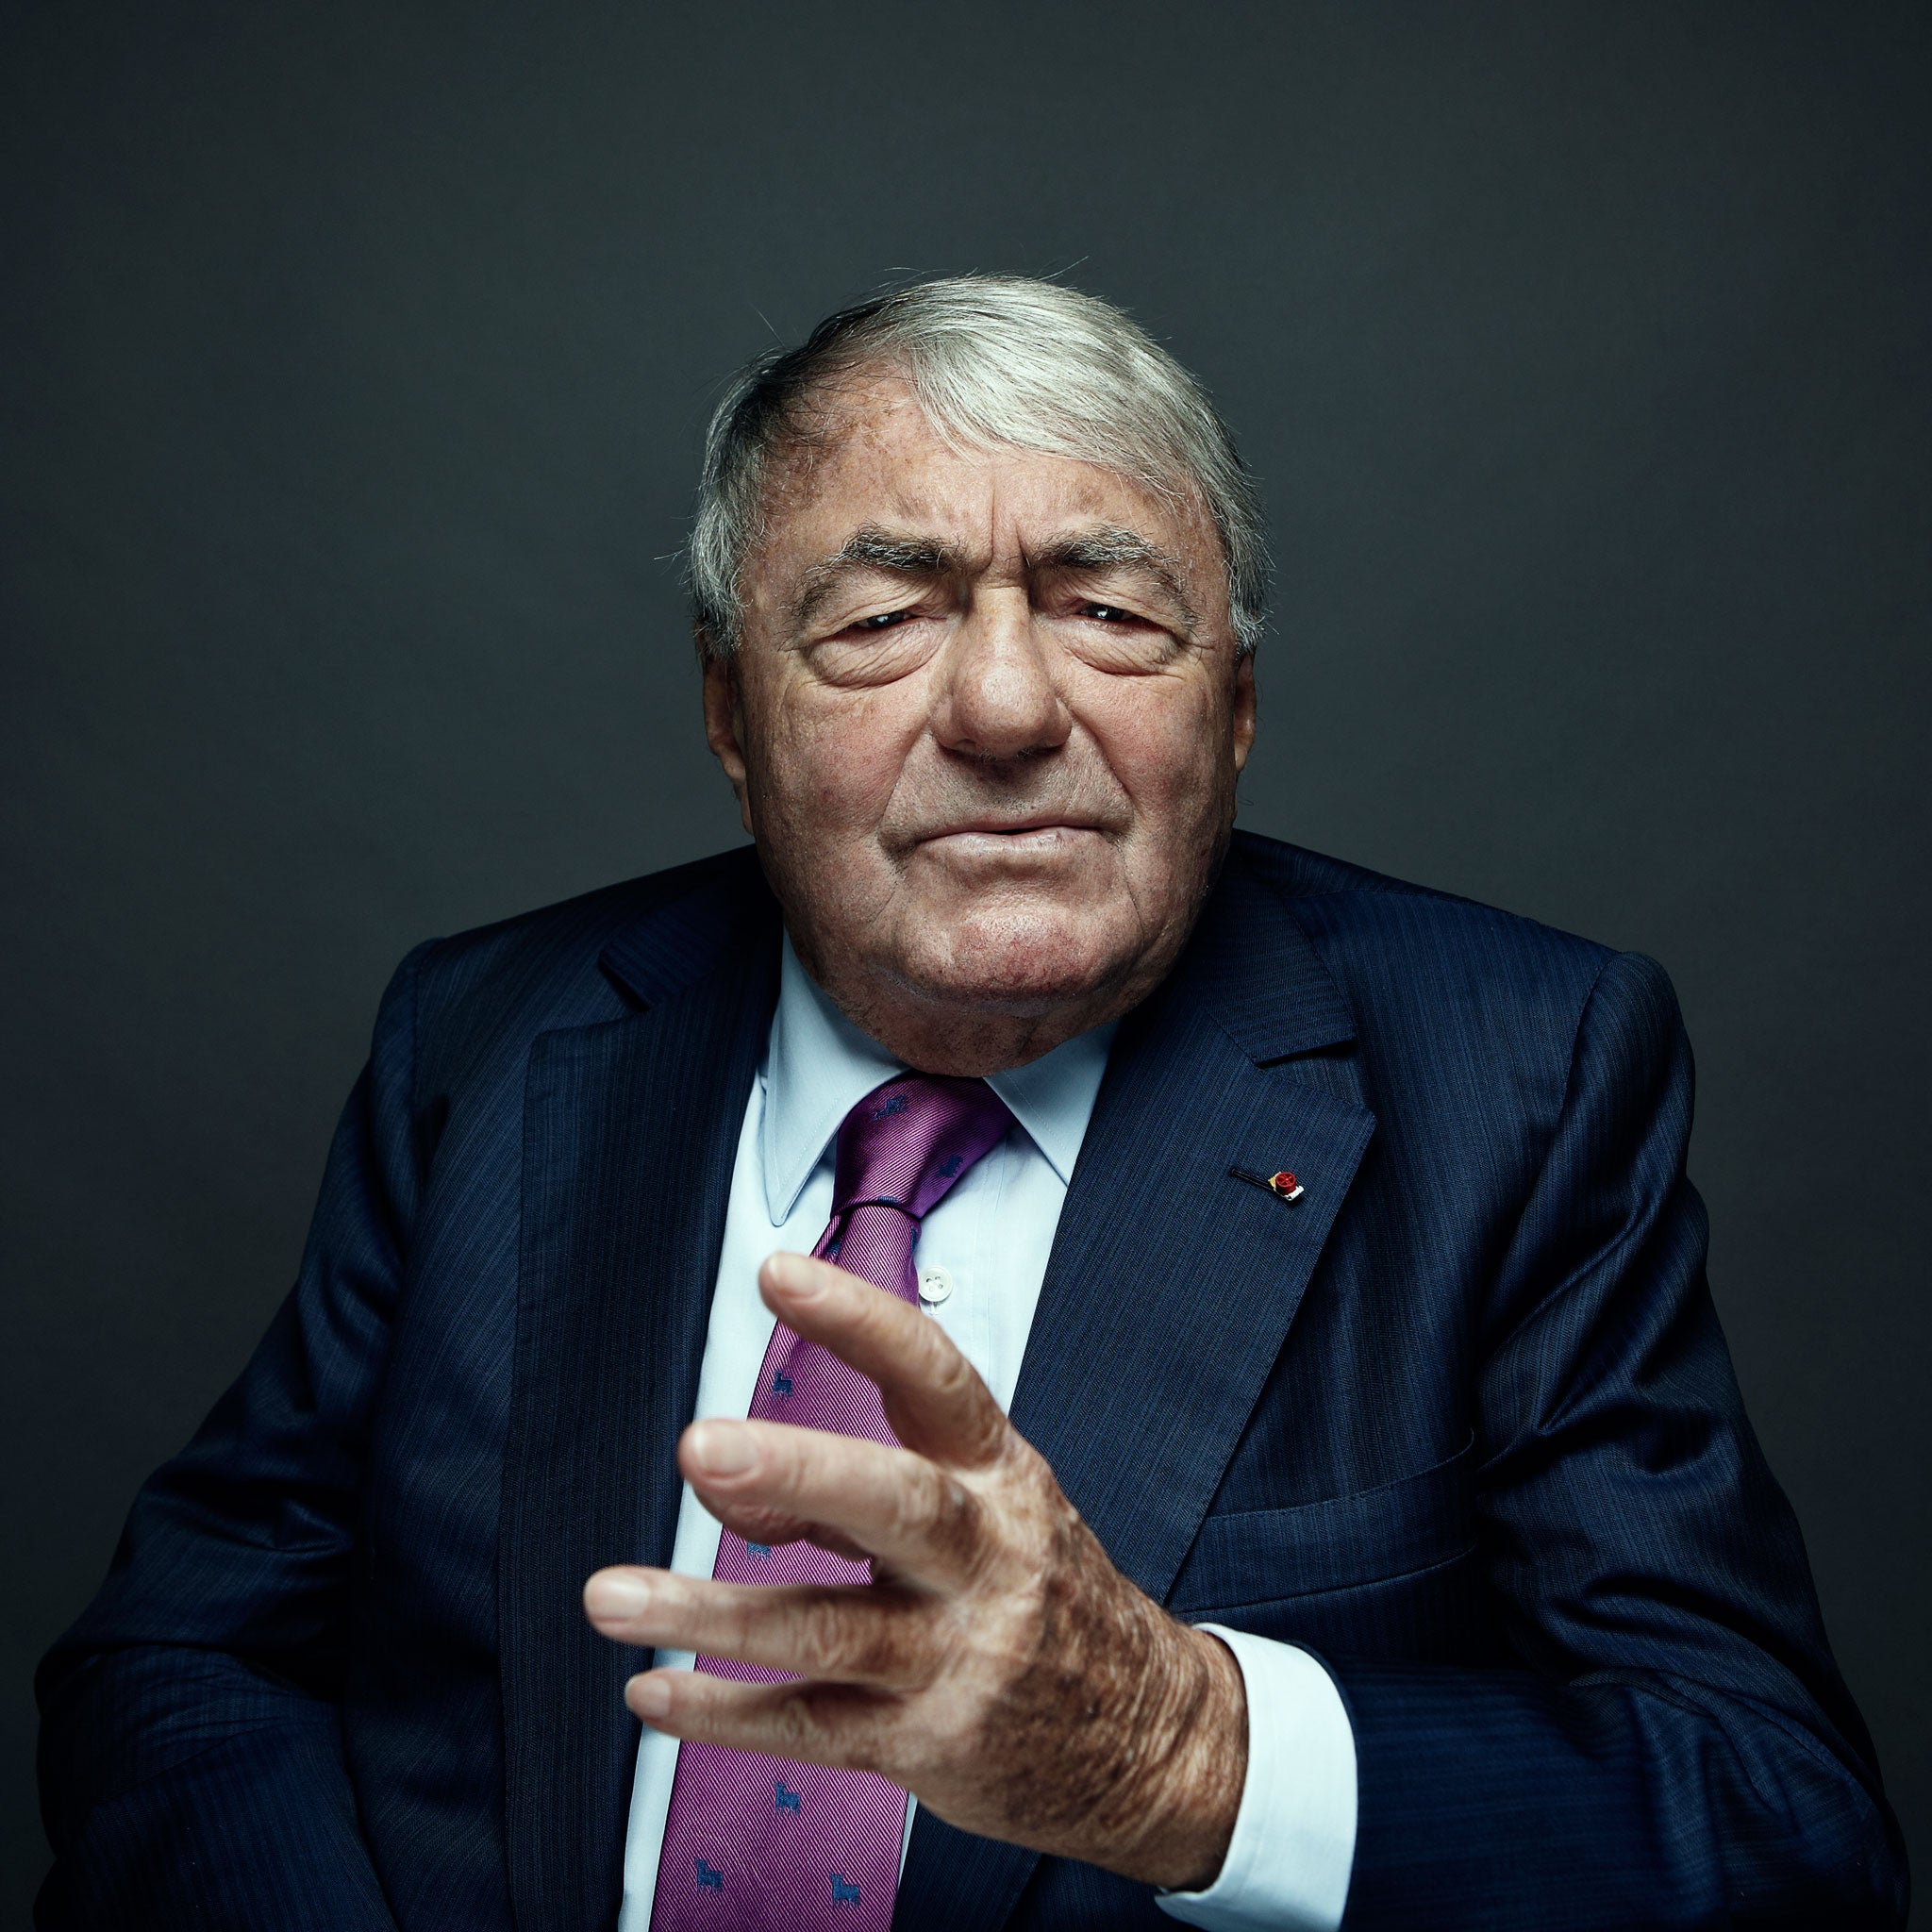 Lanzmann is best known for his documentary Shoah and has returned to one of his interviewees - a Rabbi accused of collaboration with the Nazis